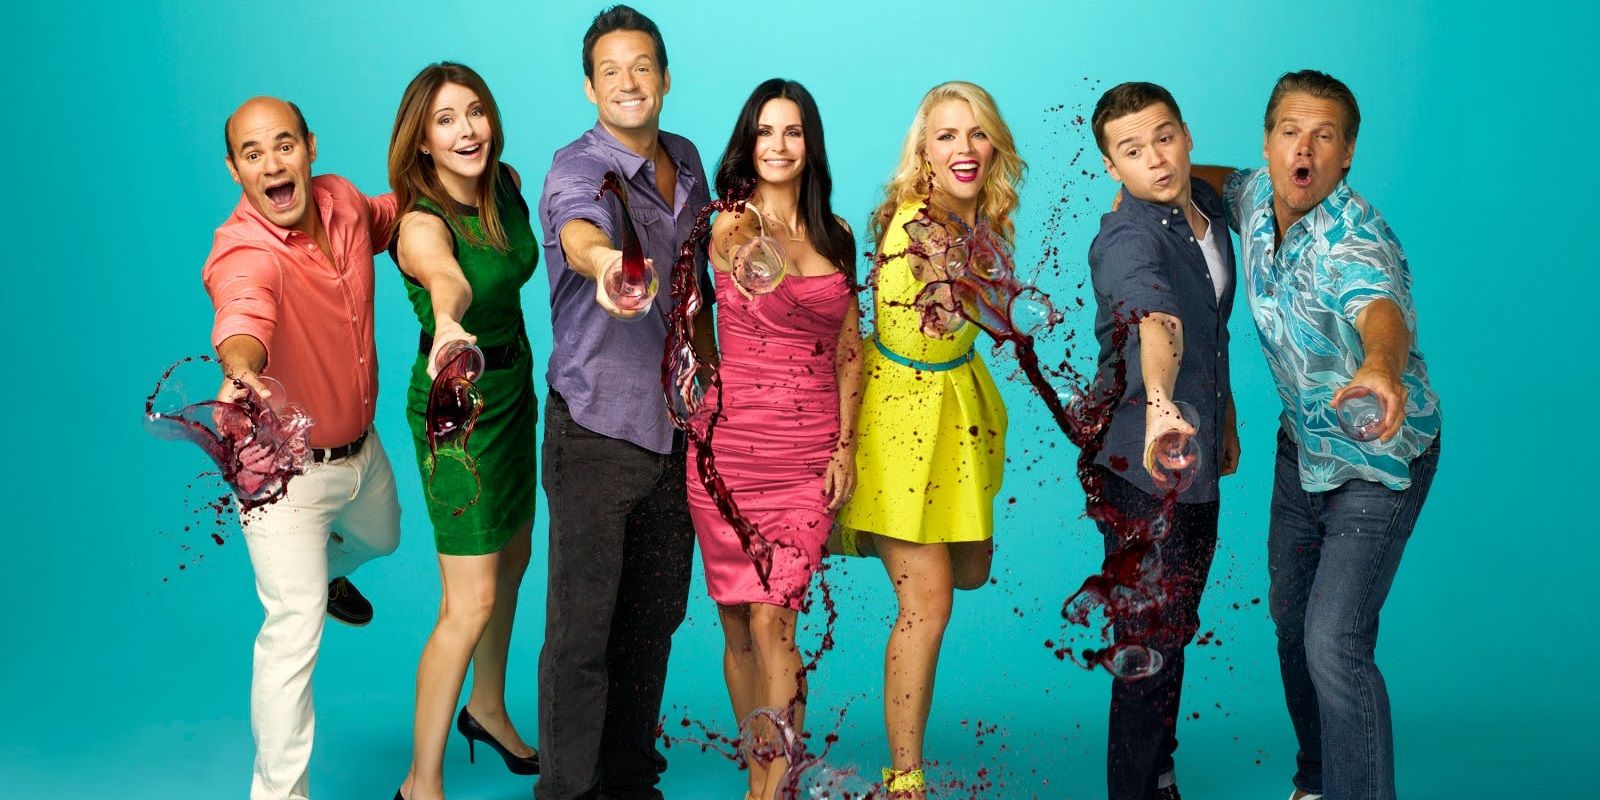 The cast throwing wine in Cougar Town poster